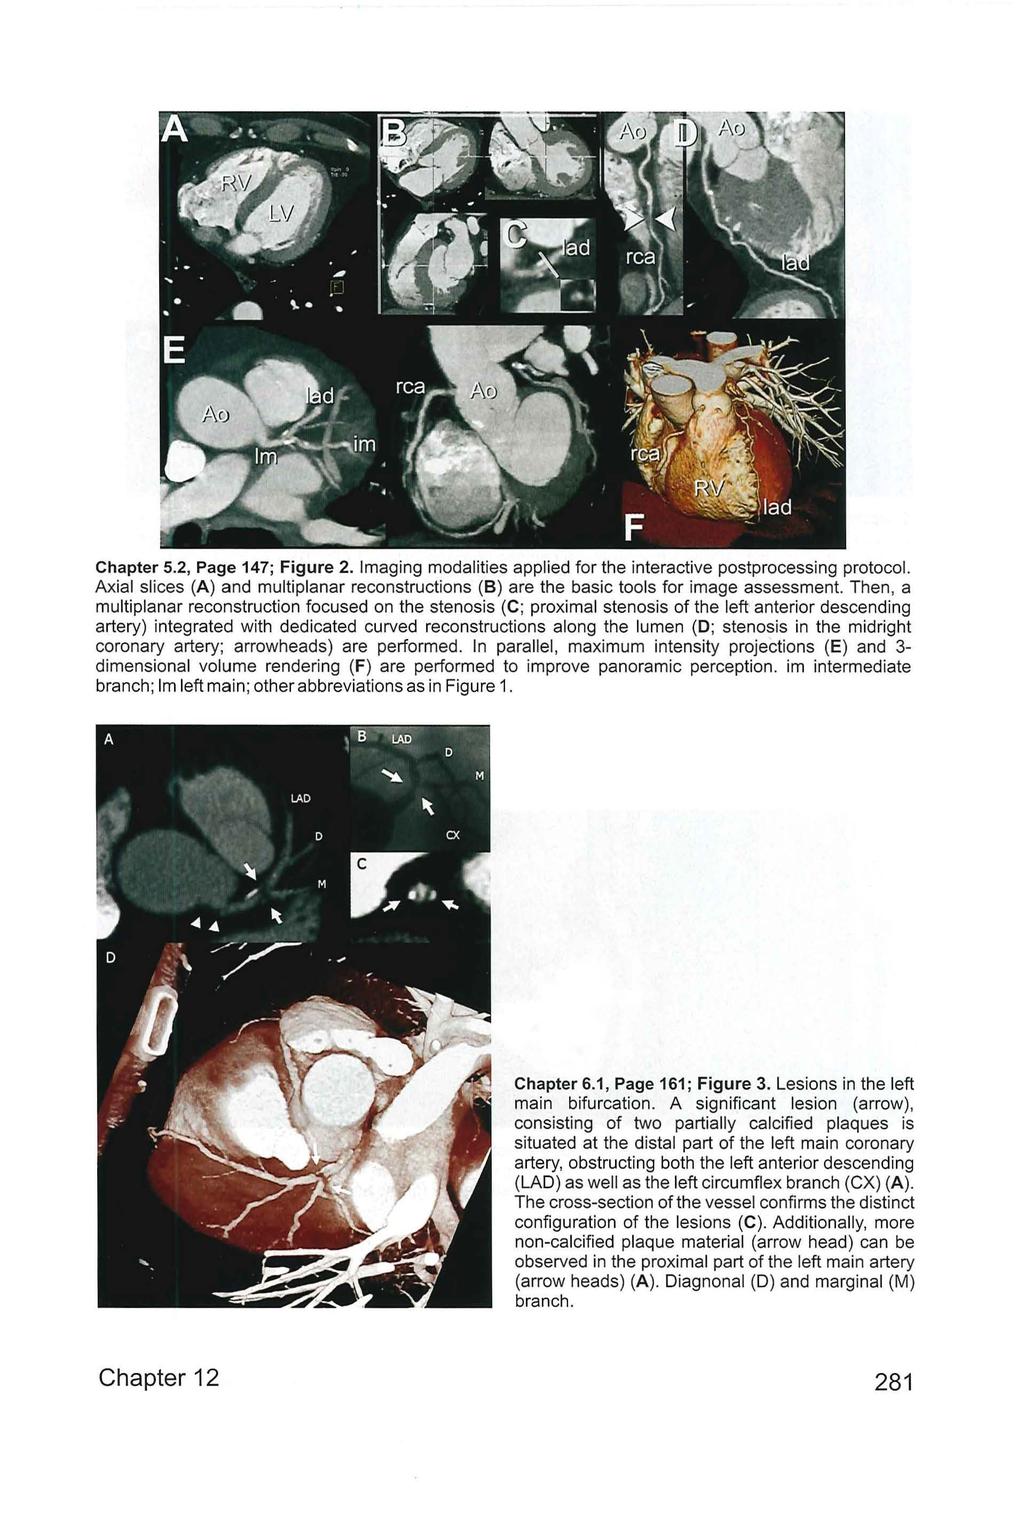 Chapter 5.2, Page 147; Figure 2. Imaging modalities applied for the interactive postprocessing protocol. Axial slices (A) and multiplanar reconstructions (B) are the basic tools for image assessment.